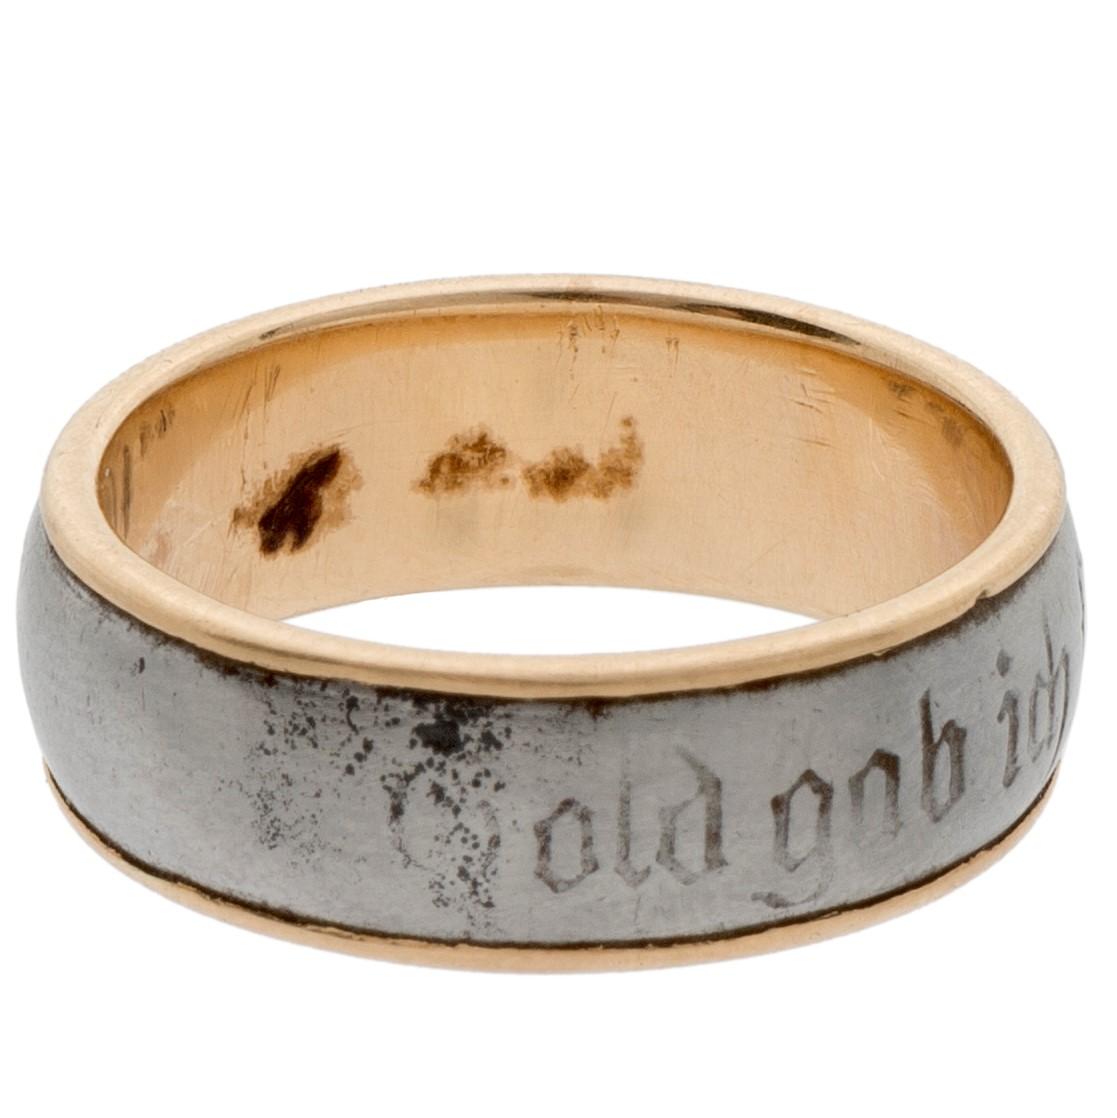 First World War (or Patriotic) Iron Ring “Gold gab ich für Eisen”
Austro-Hungarian Empire, circa 1919
Gold and Iron
Outer diameter 20 mm., width of band 7 mm.
Weight 3.6 gr., US size 6.5, UK size N

Just as wedding rings mark the commitment and